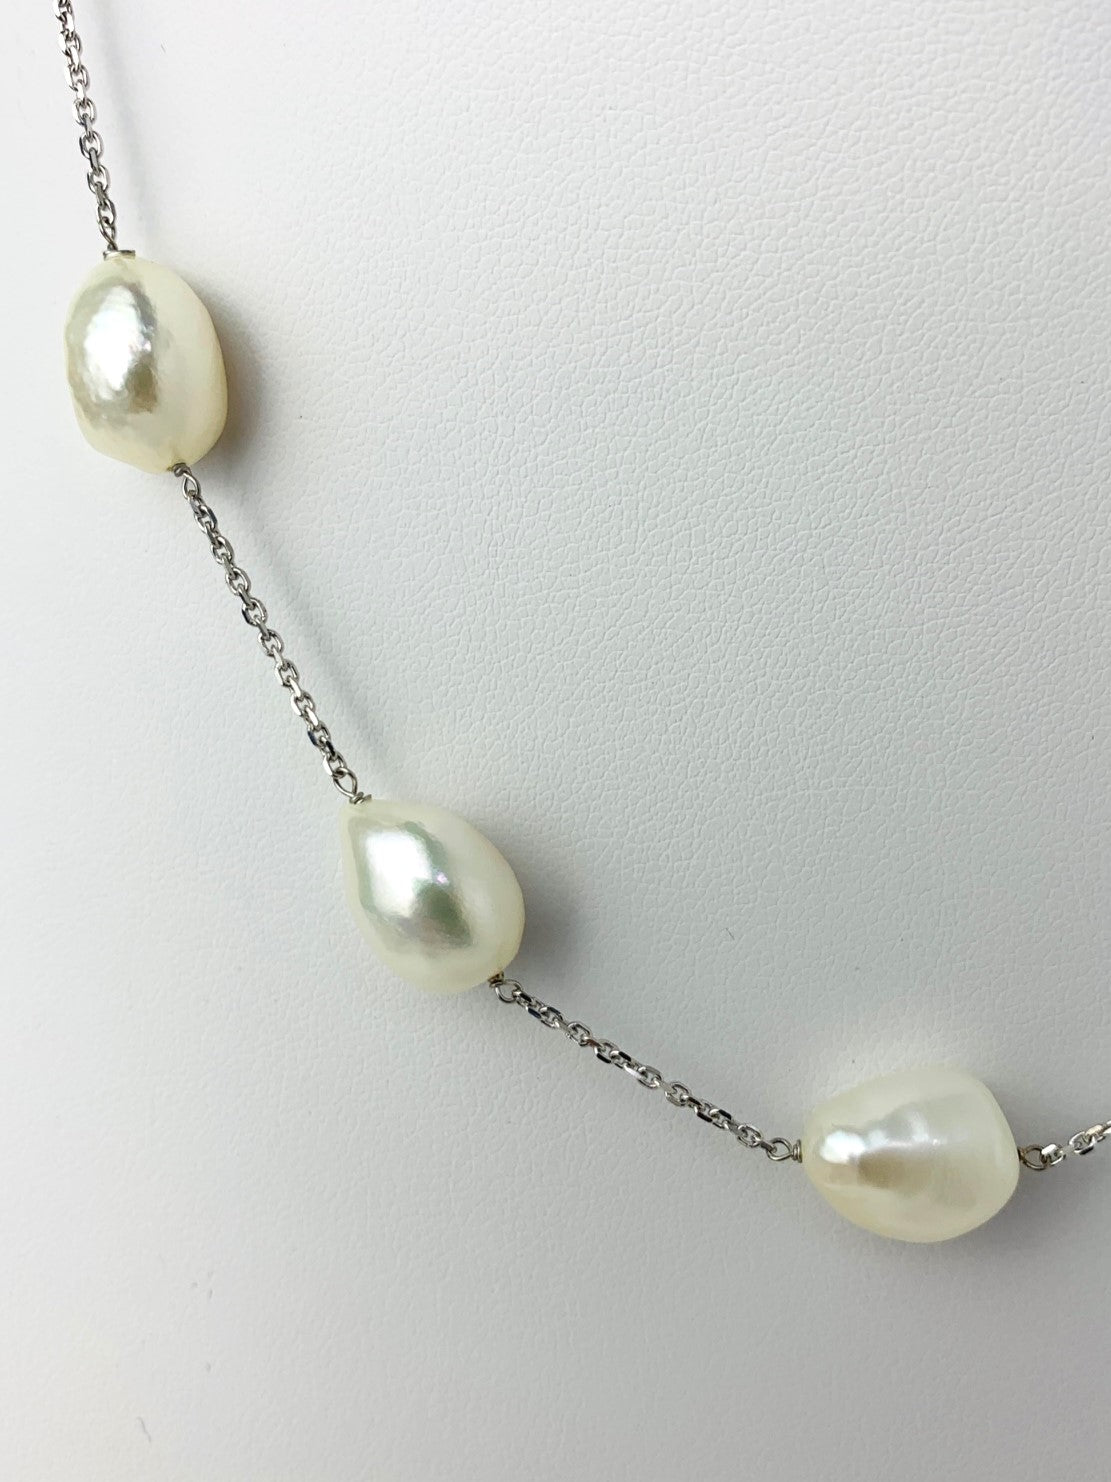 18" White Oval Freshwater Baroque Pearl Station Necklace in 14KY - NCK-635-TNCPRL14W-WH-18